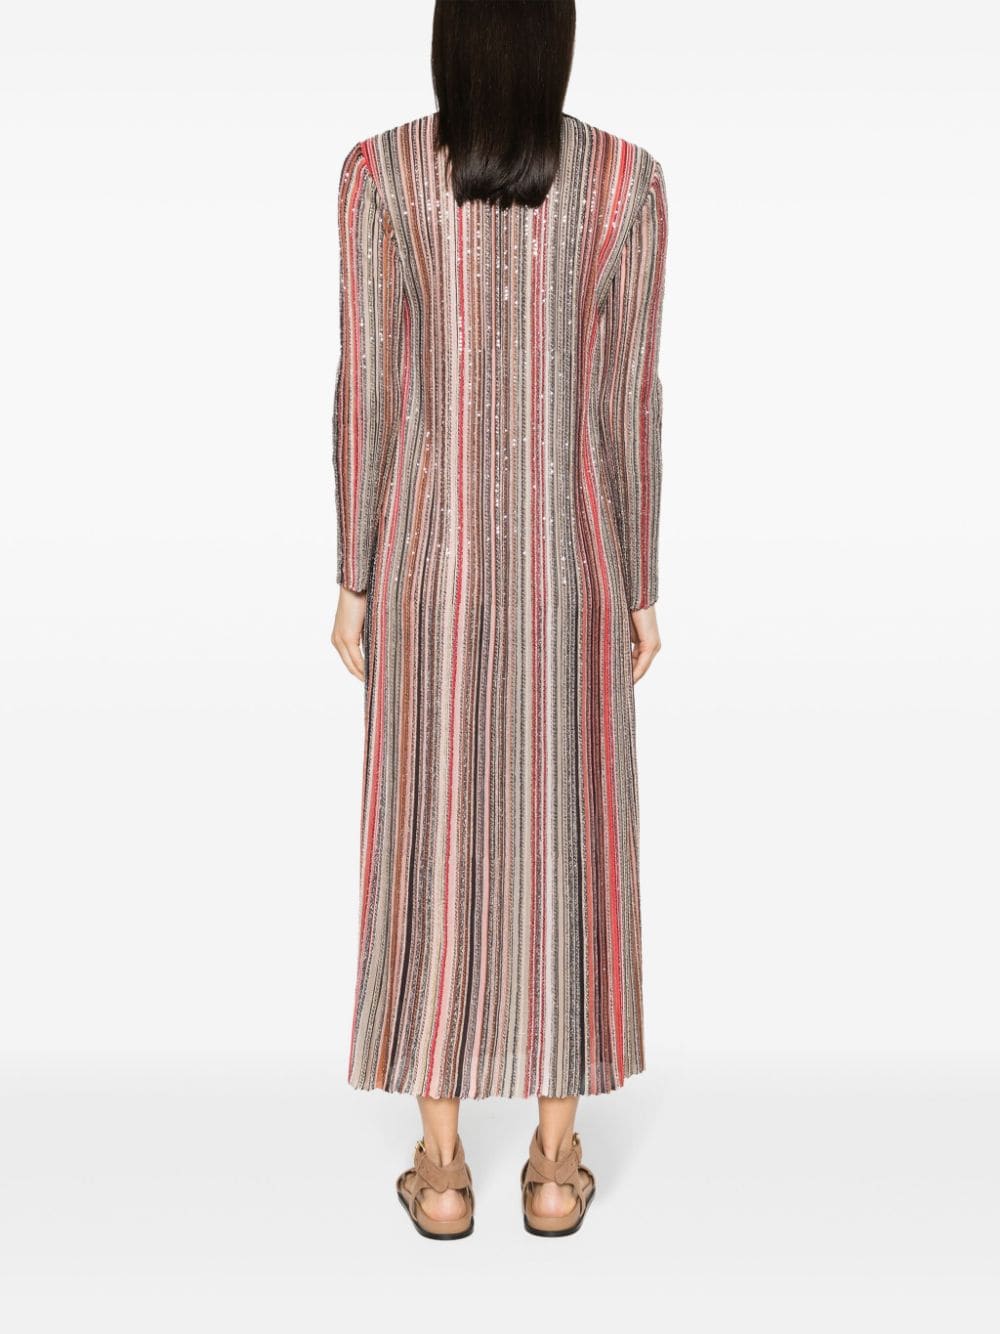 Striped Long Cardigan with Metallic Threading and Sequin Embellishment